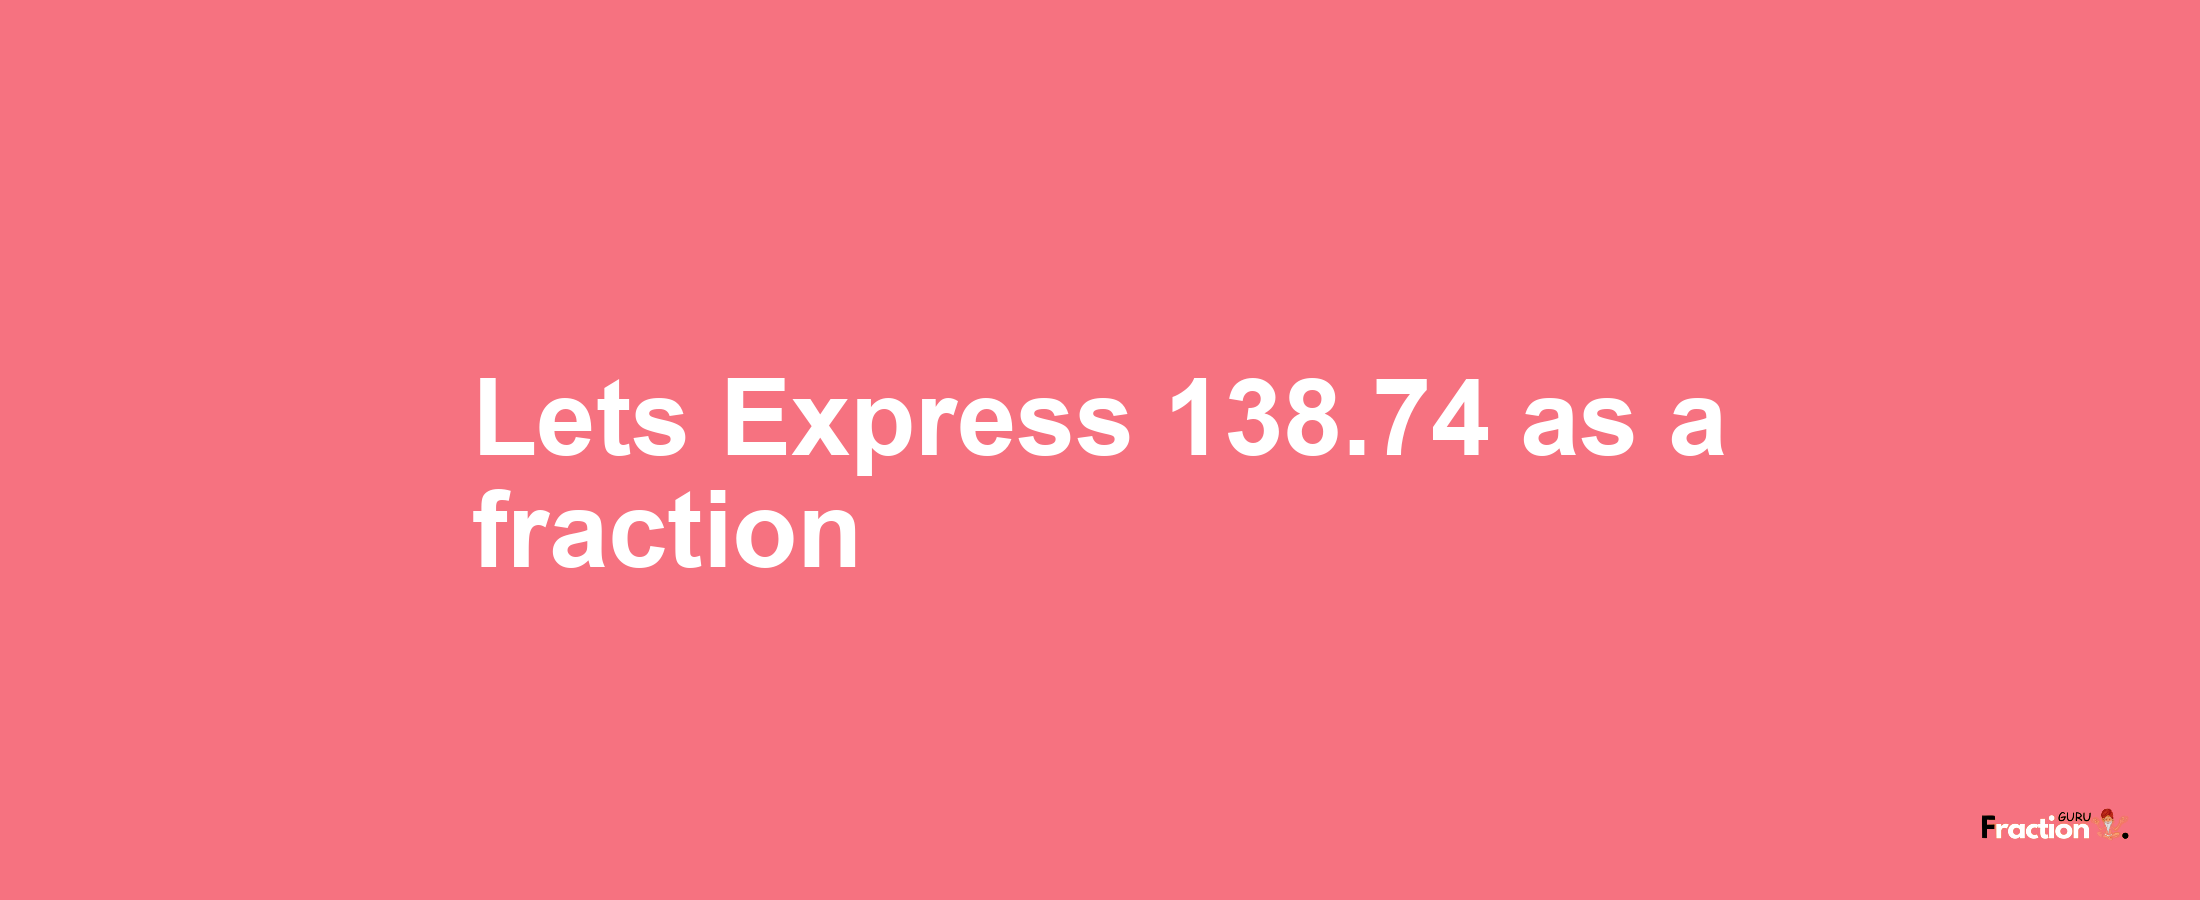 Lets Express 138.74 as afraction